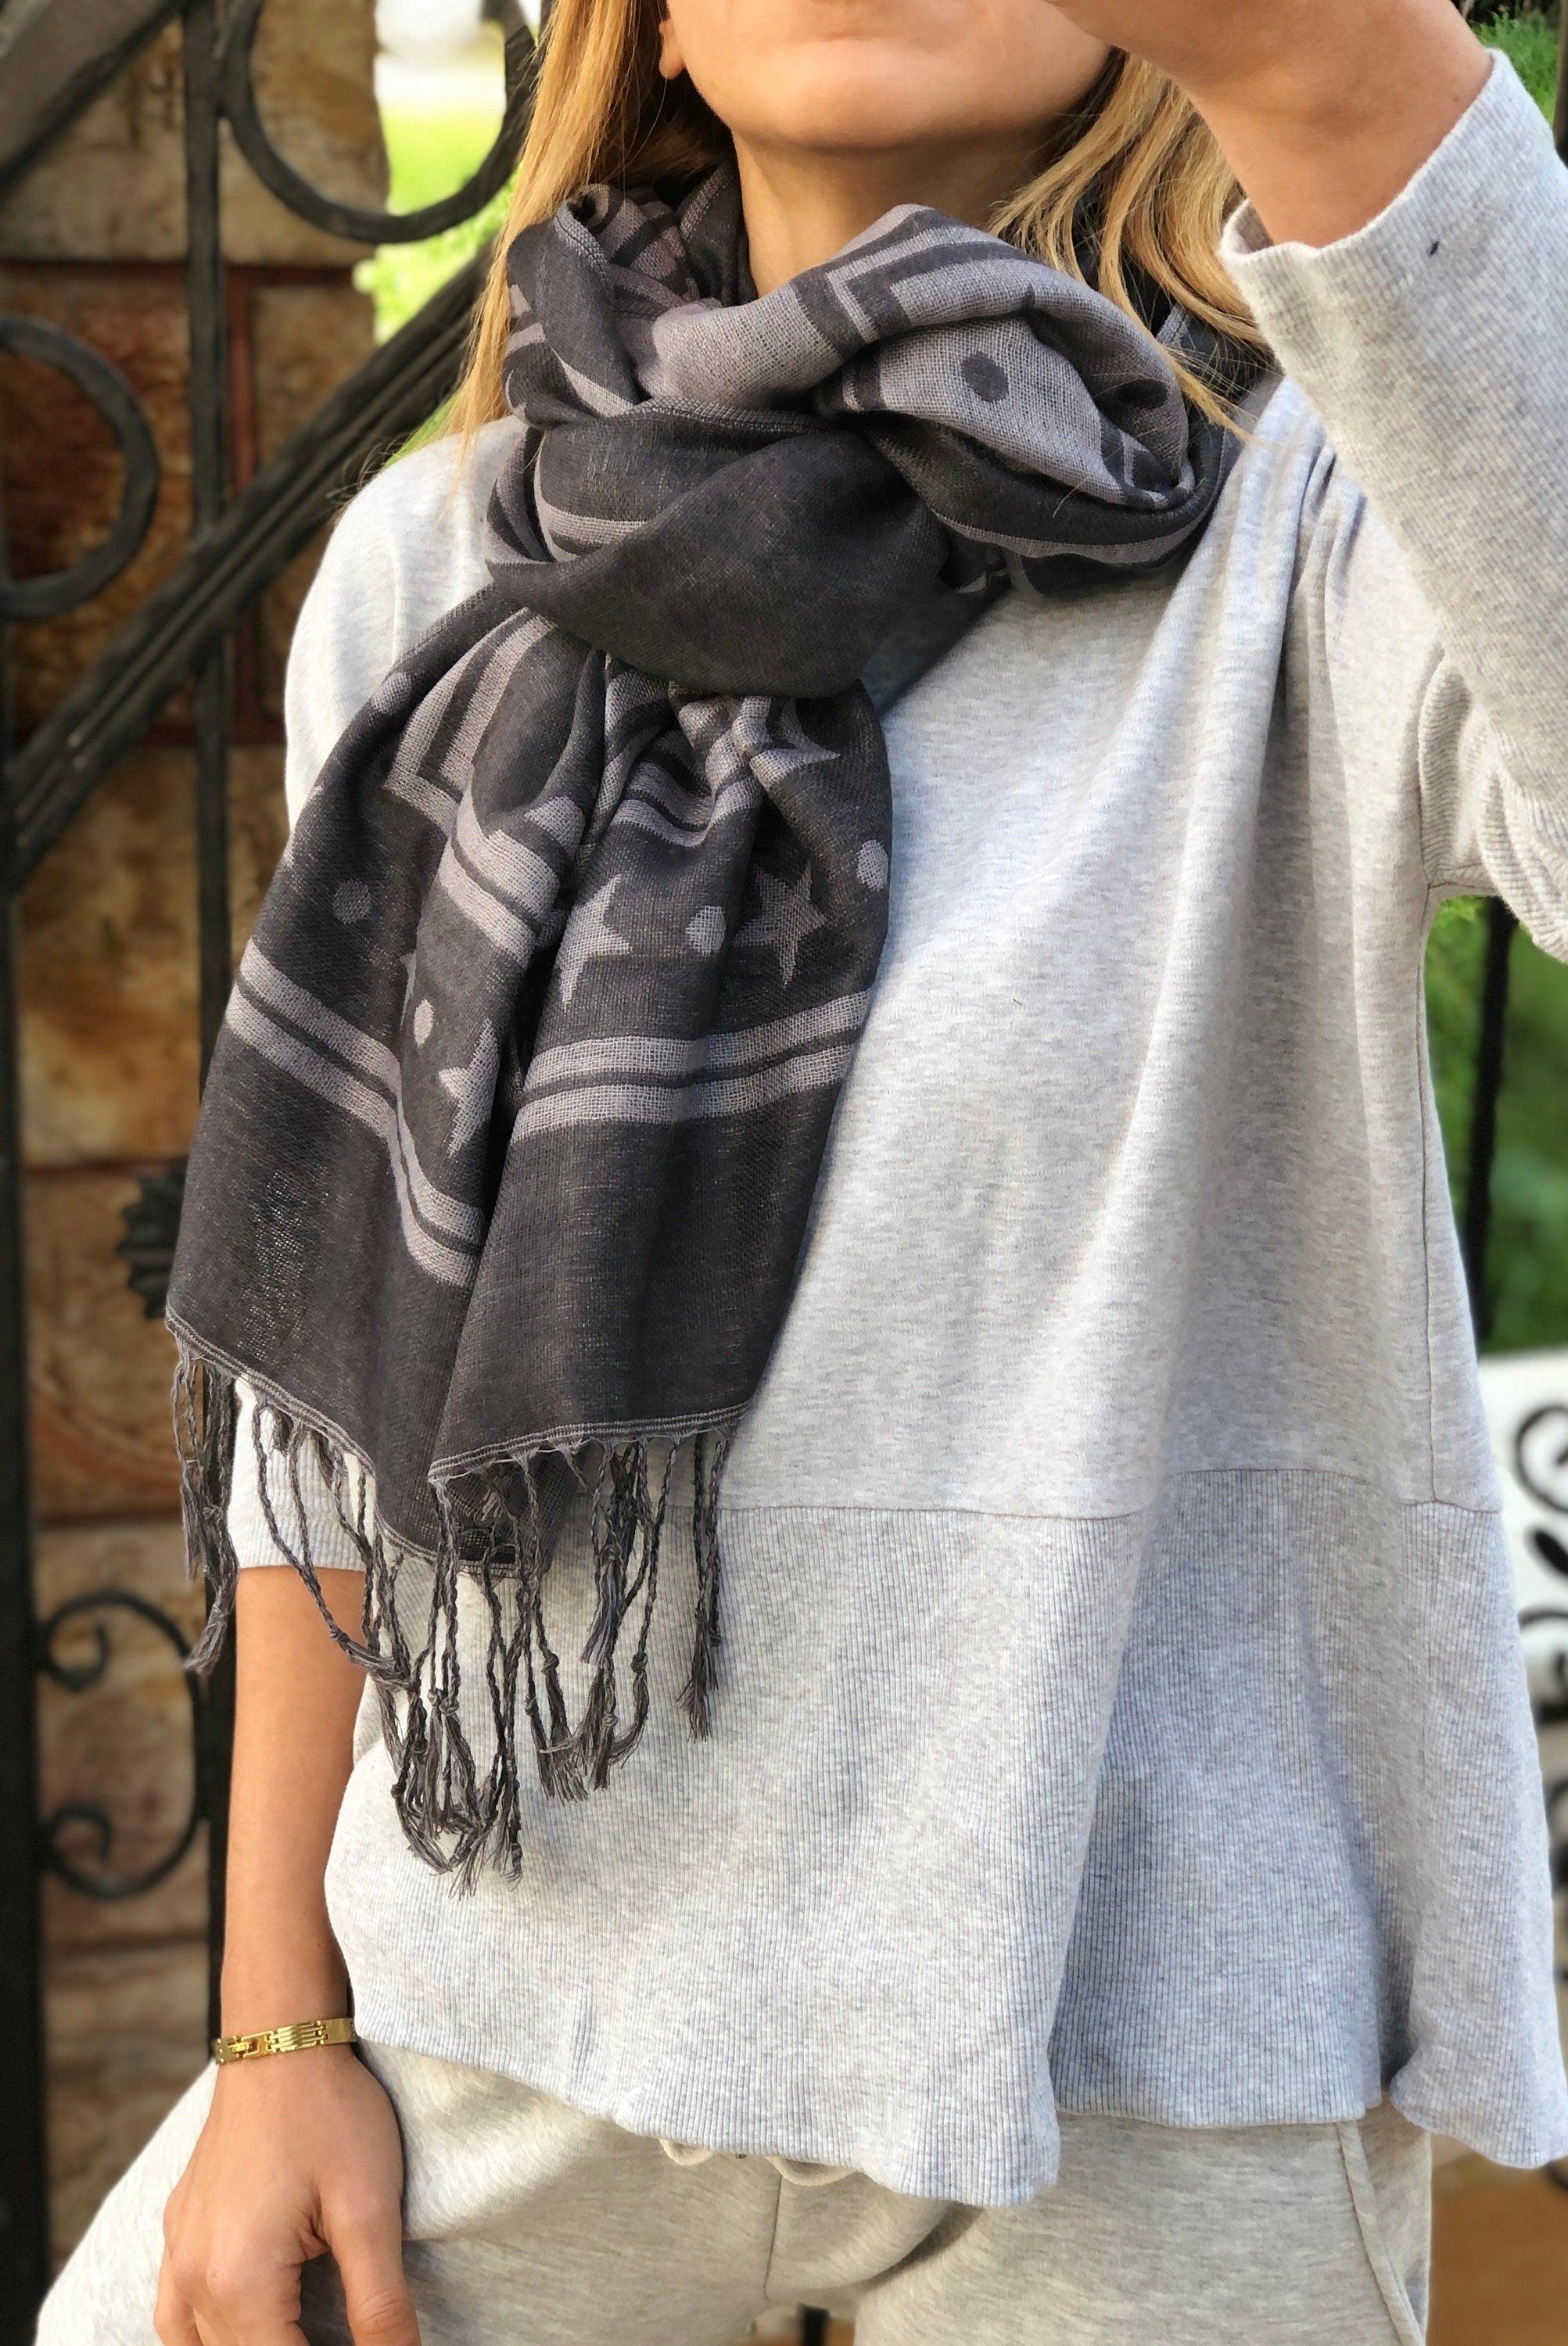 Luxurious Anthracite Gray Acrylic Cotton Scarf - Large Rectangle Scarf with Geometric and Star Pattern - Perfect Gift for Mum available at Moyoni Design